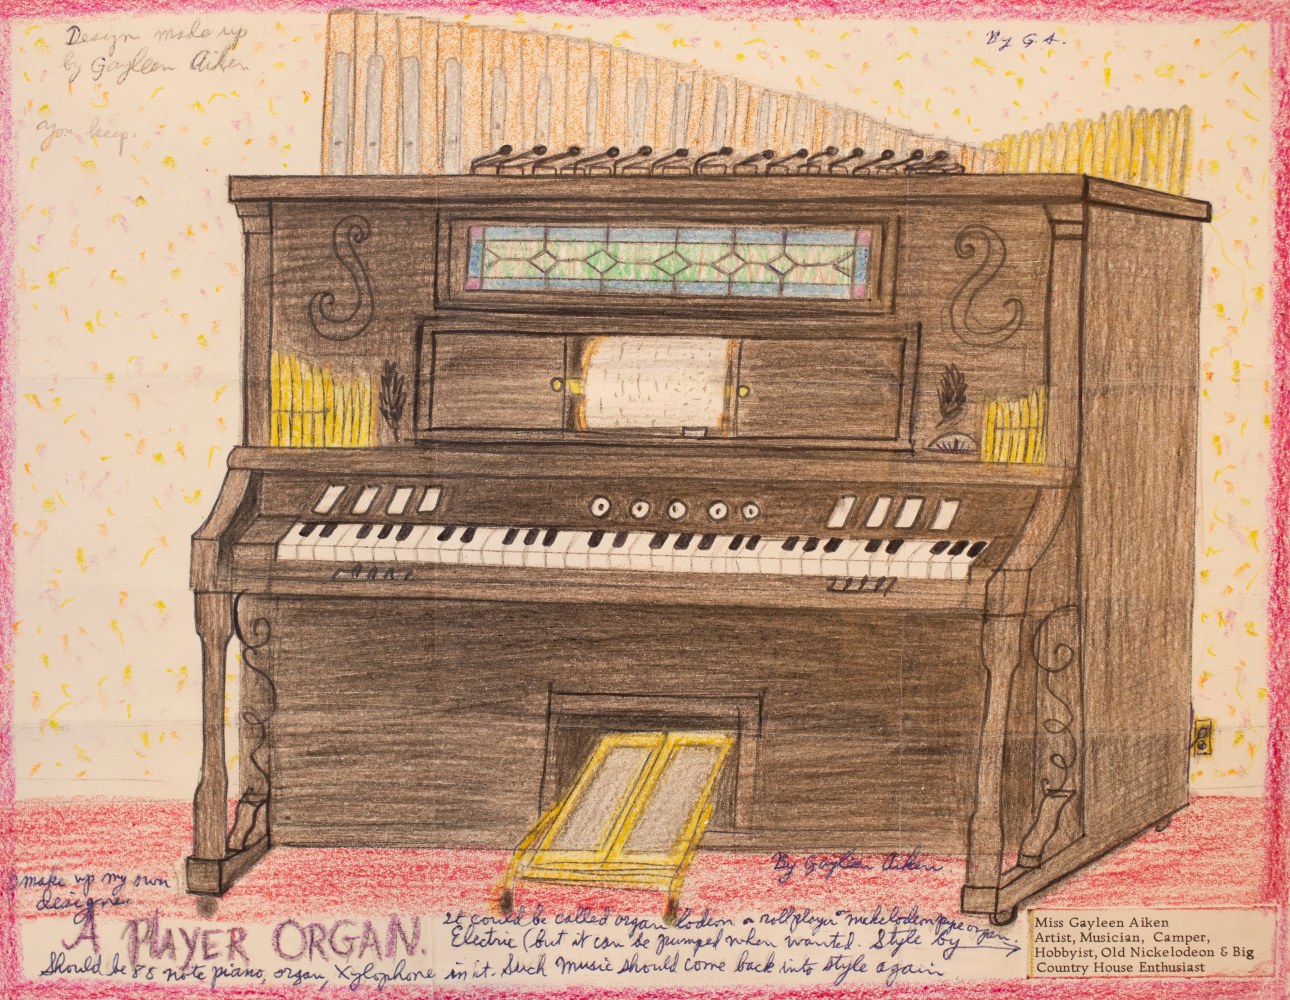 A Player Organ, c. 1992
Colored pencil, ballpoint pen, and crayon on paper
8.5 x 11 inches